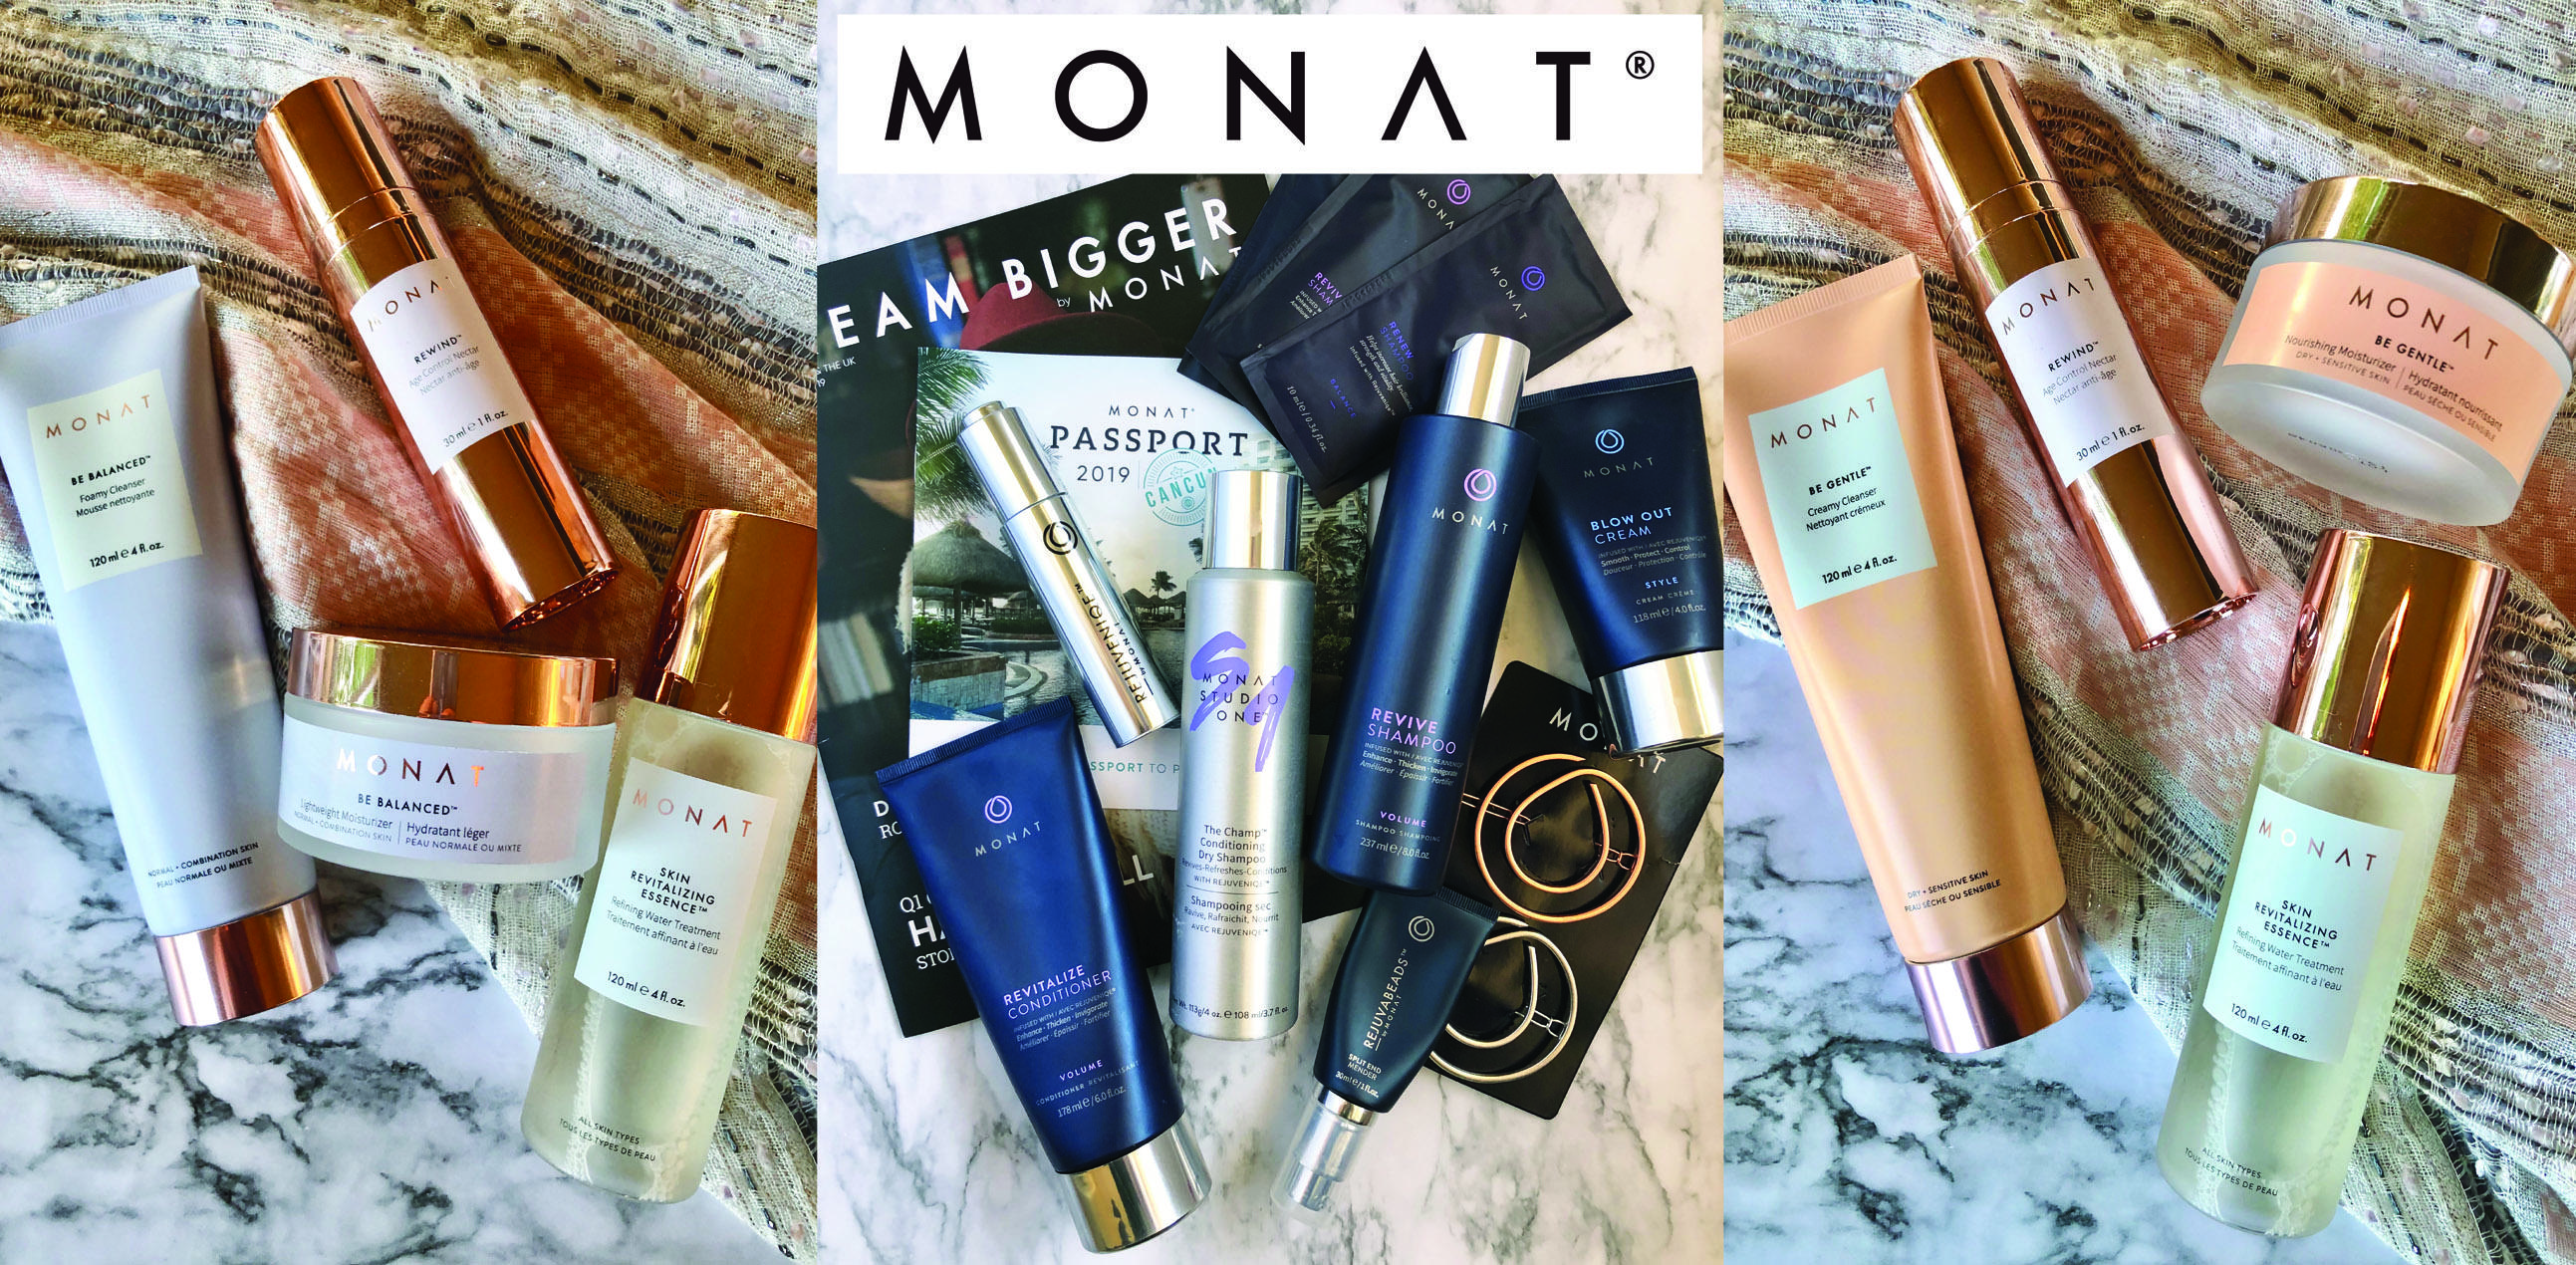 Monat Spa Party - Hosted by Denise, Stacie and Stephanie